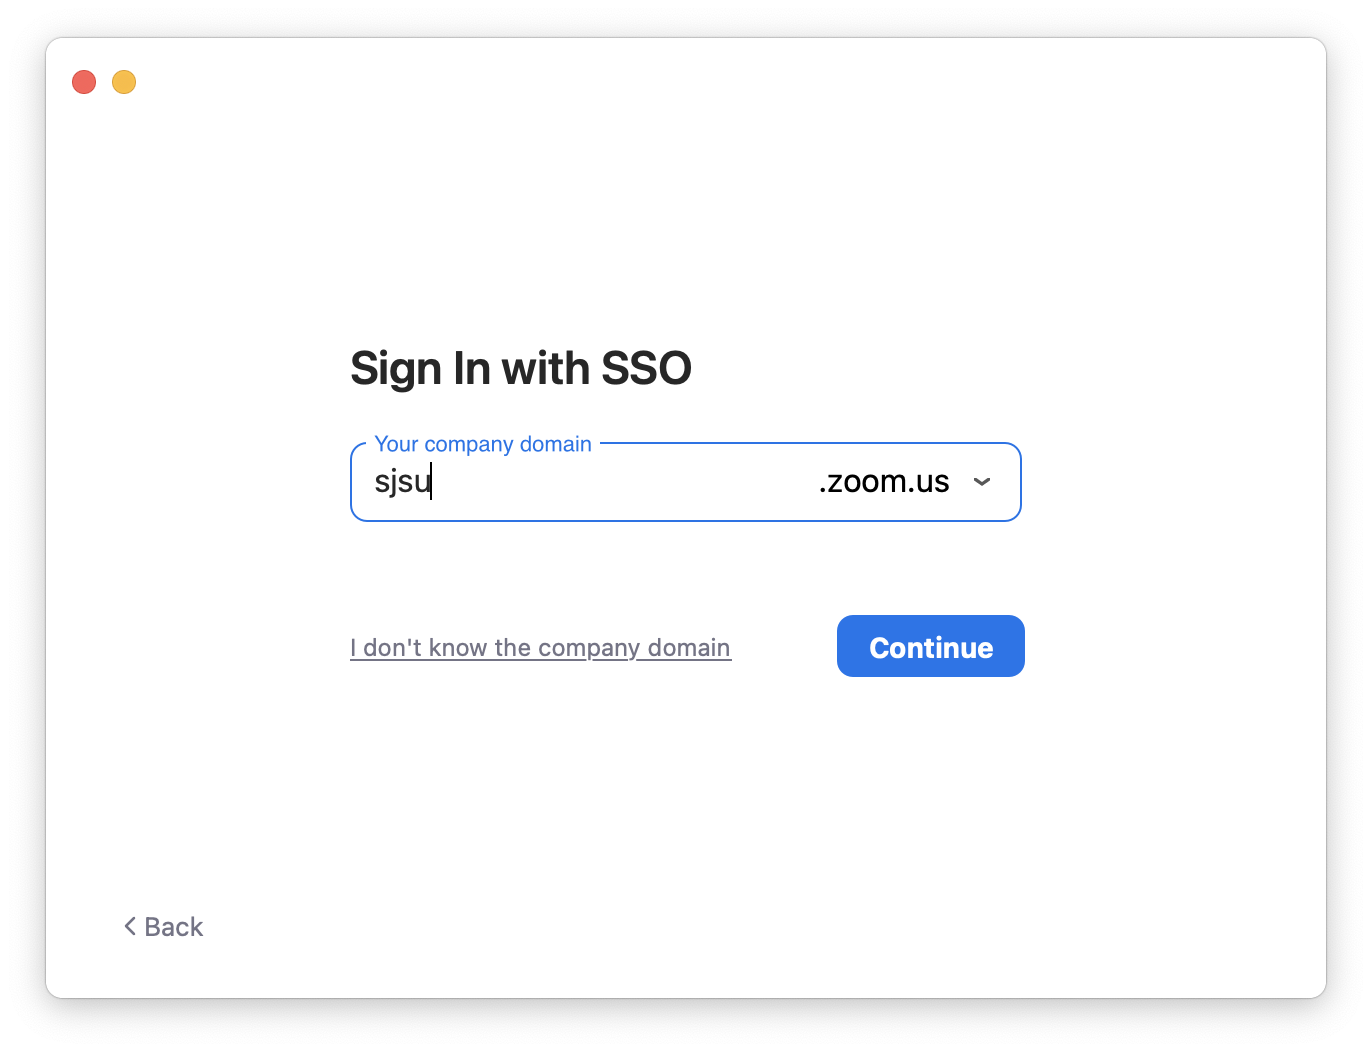 SSO sign-in page in Zoom